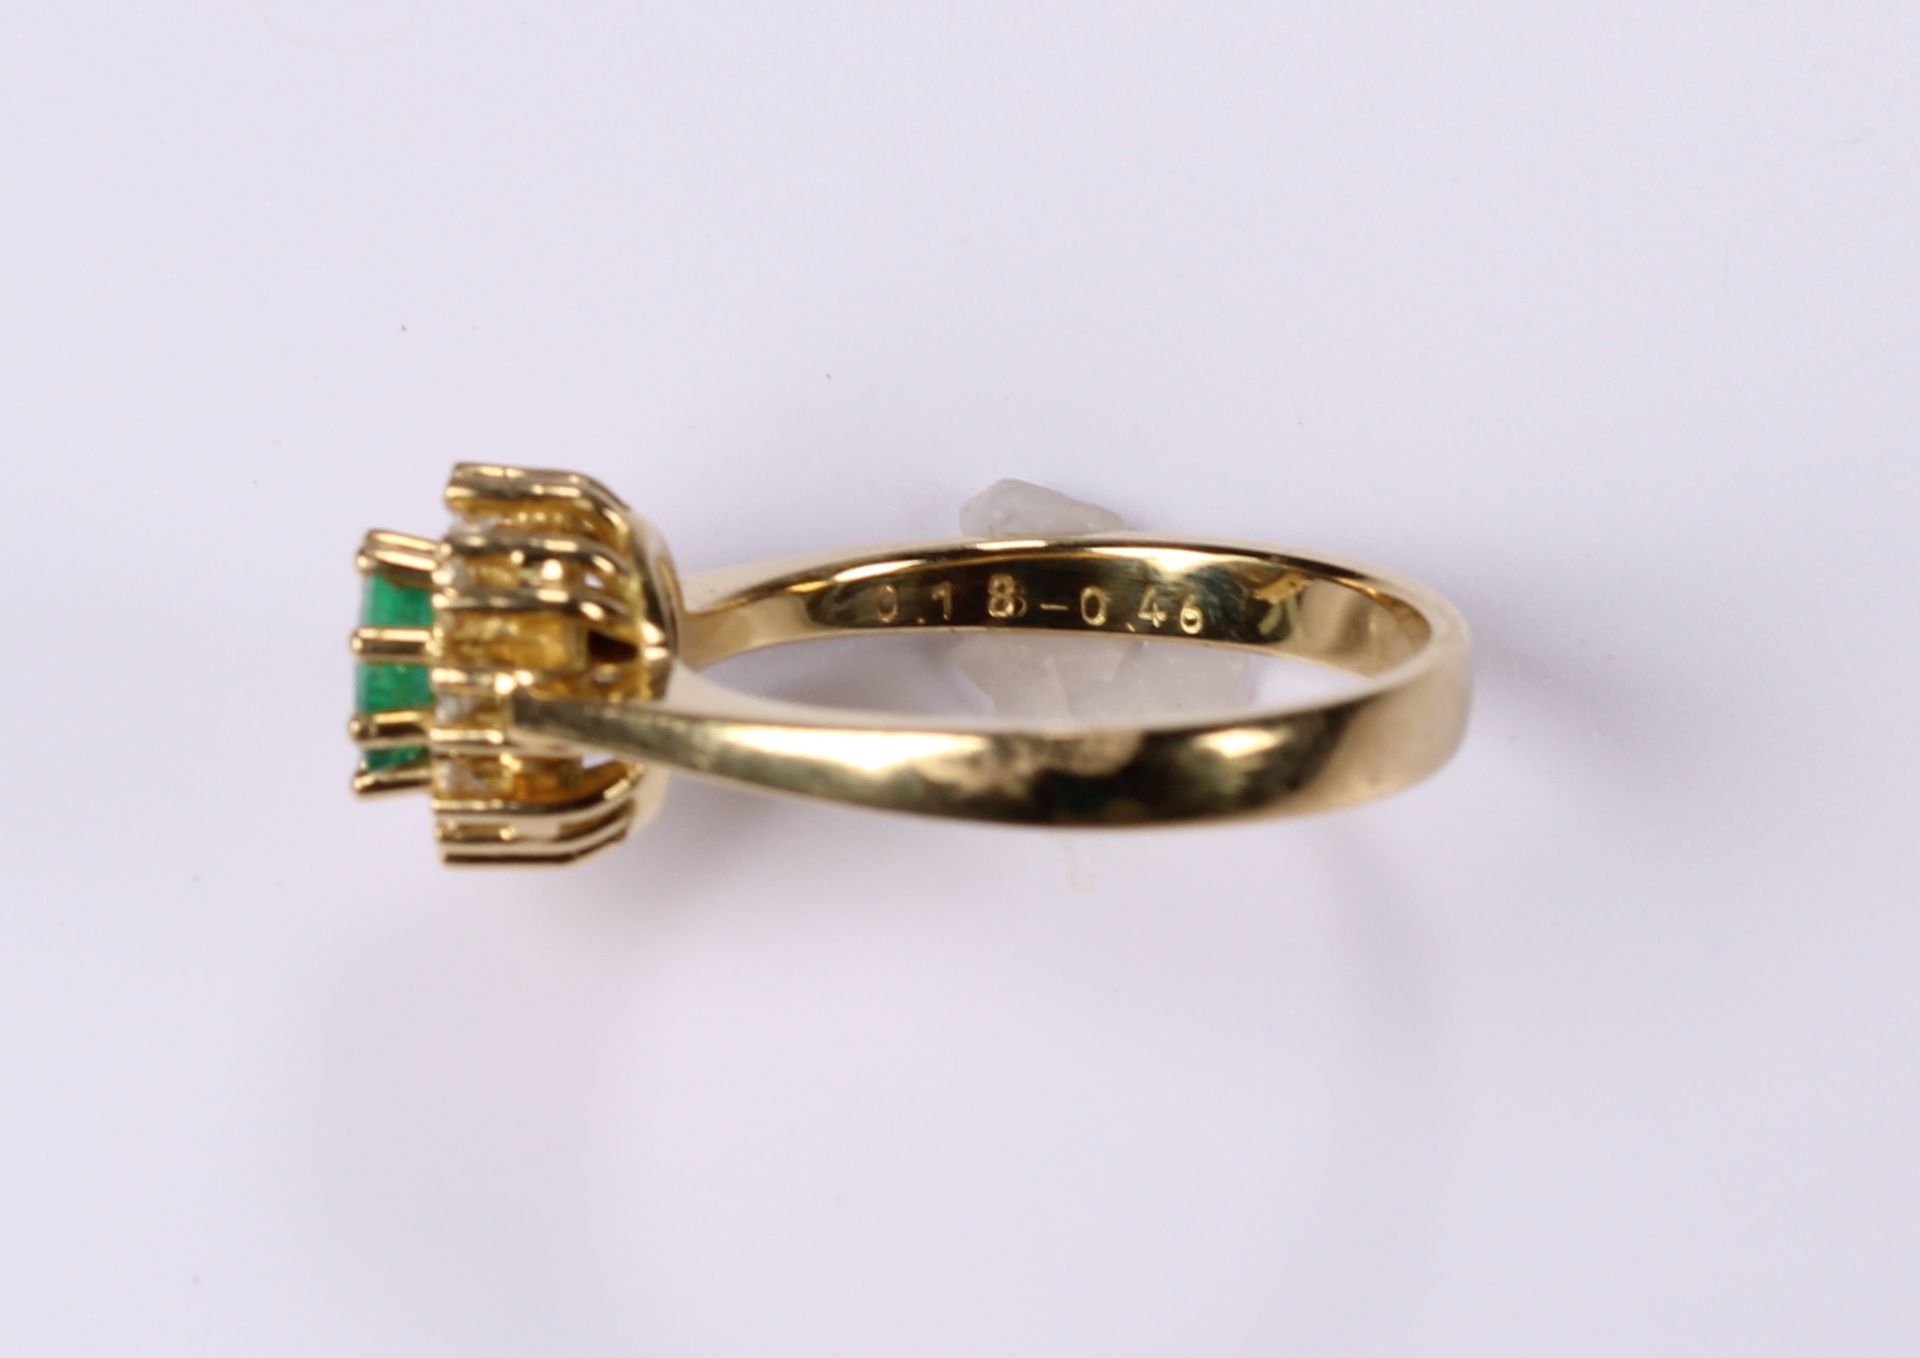 18K Yellow Gold Ring with Emerald and Diamonds - Image 2 of 4